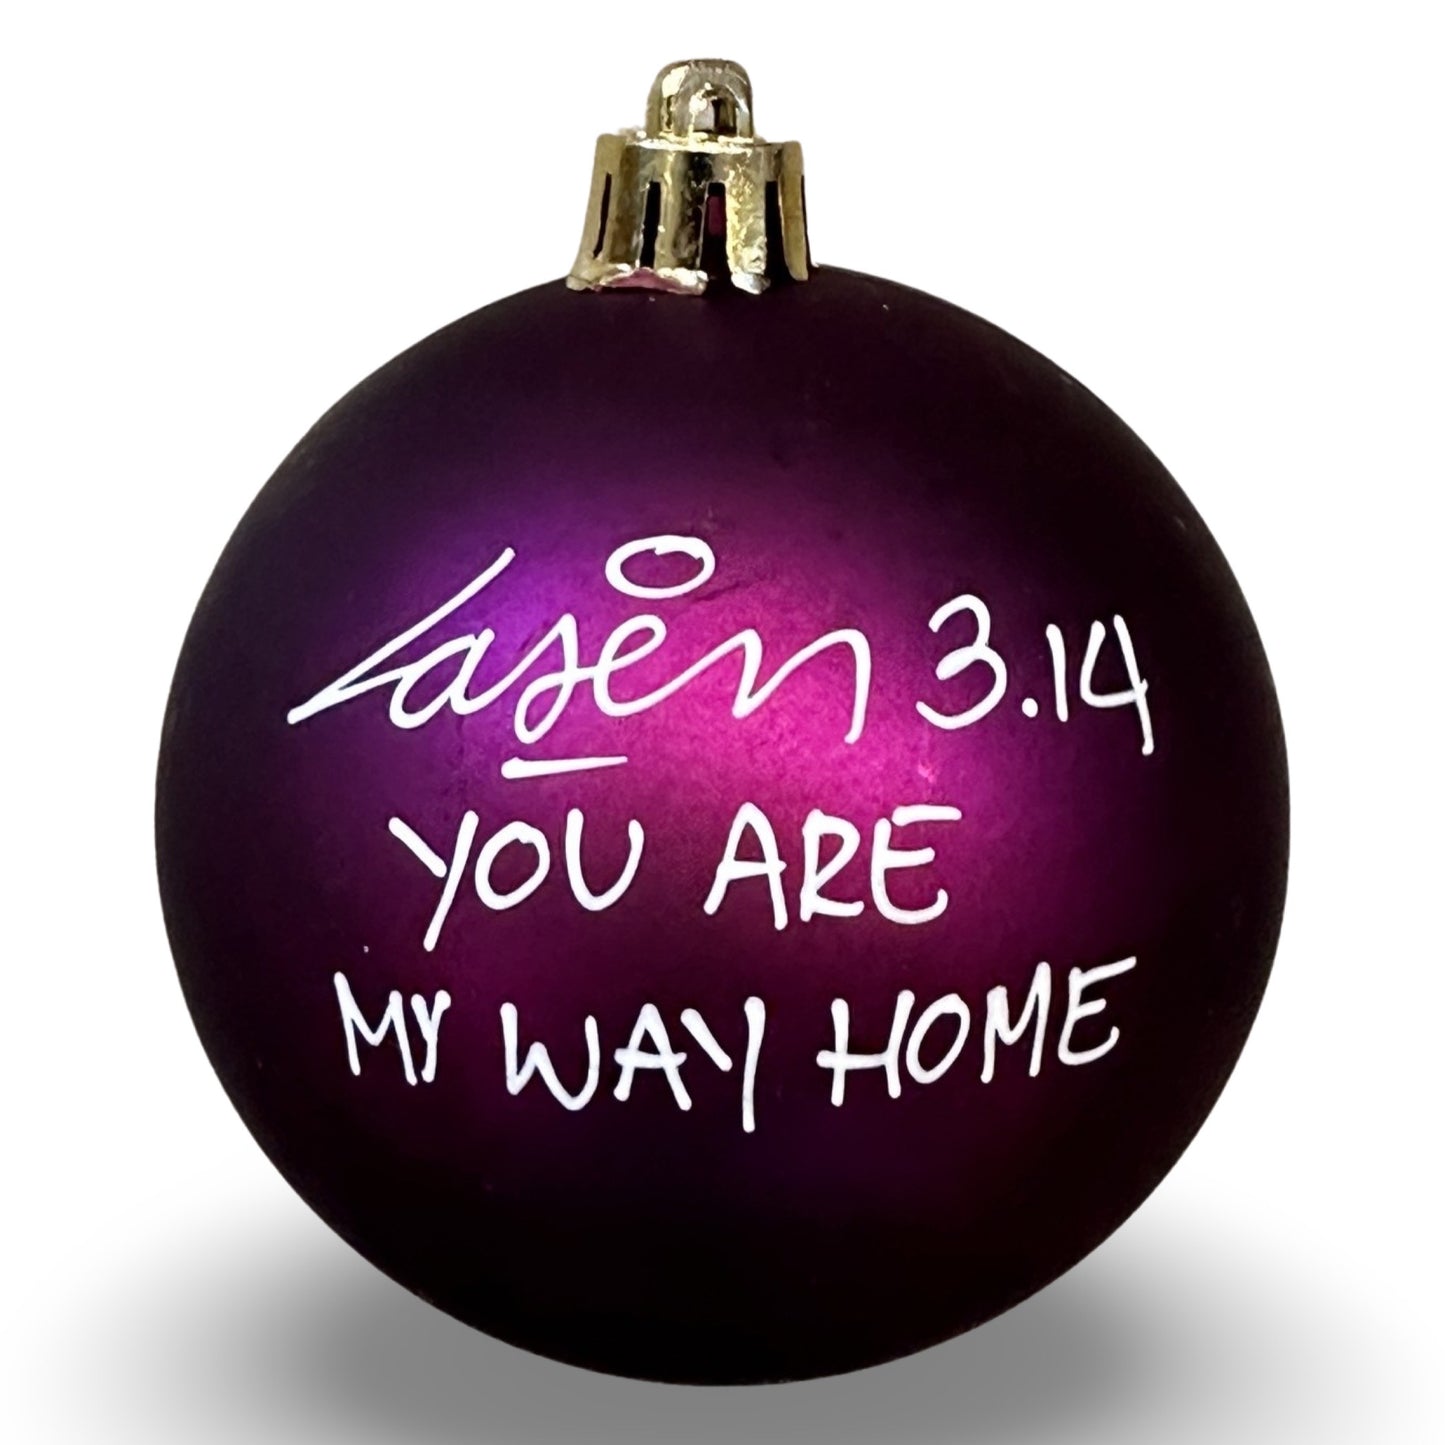 You Are My Way Home | Laser 3.14 x Famous Amsterdam Christmas Ball Ornament